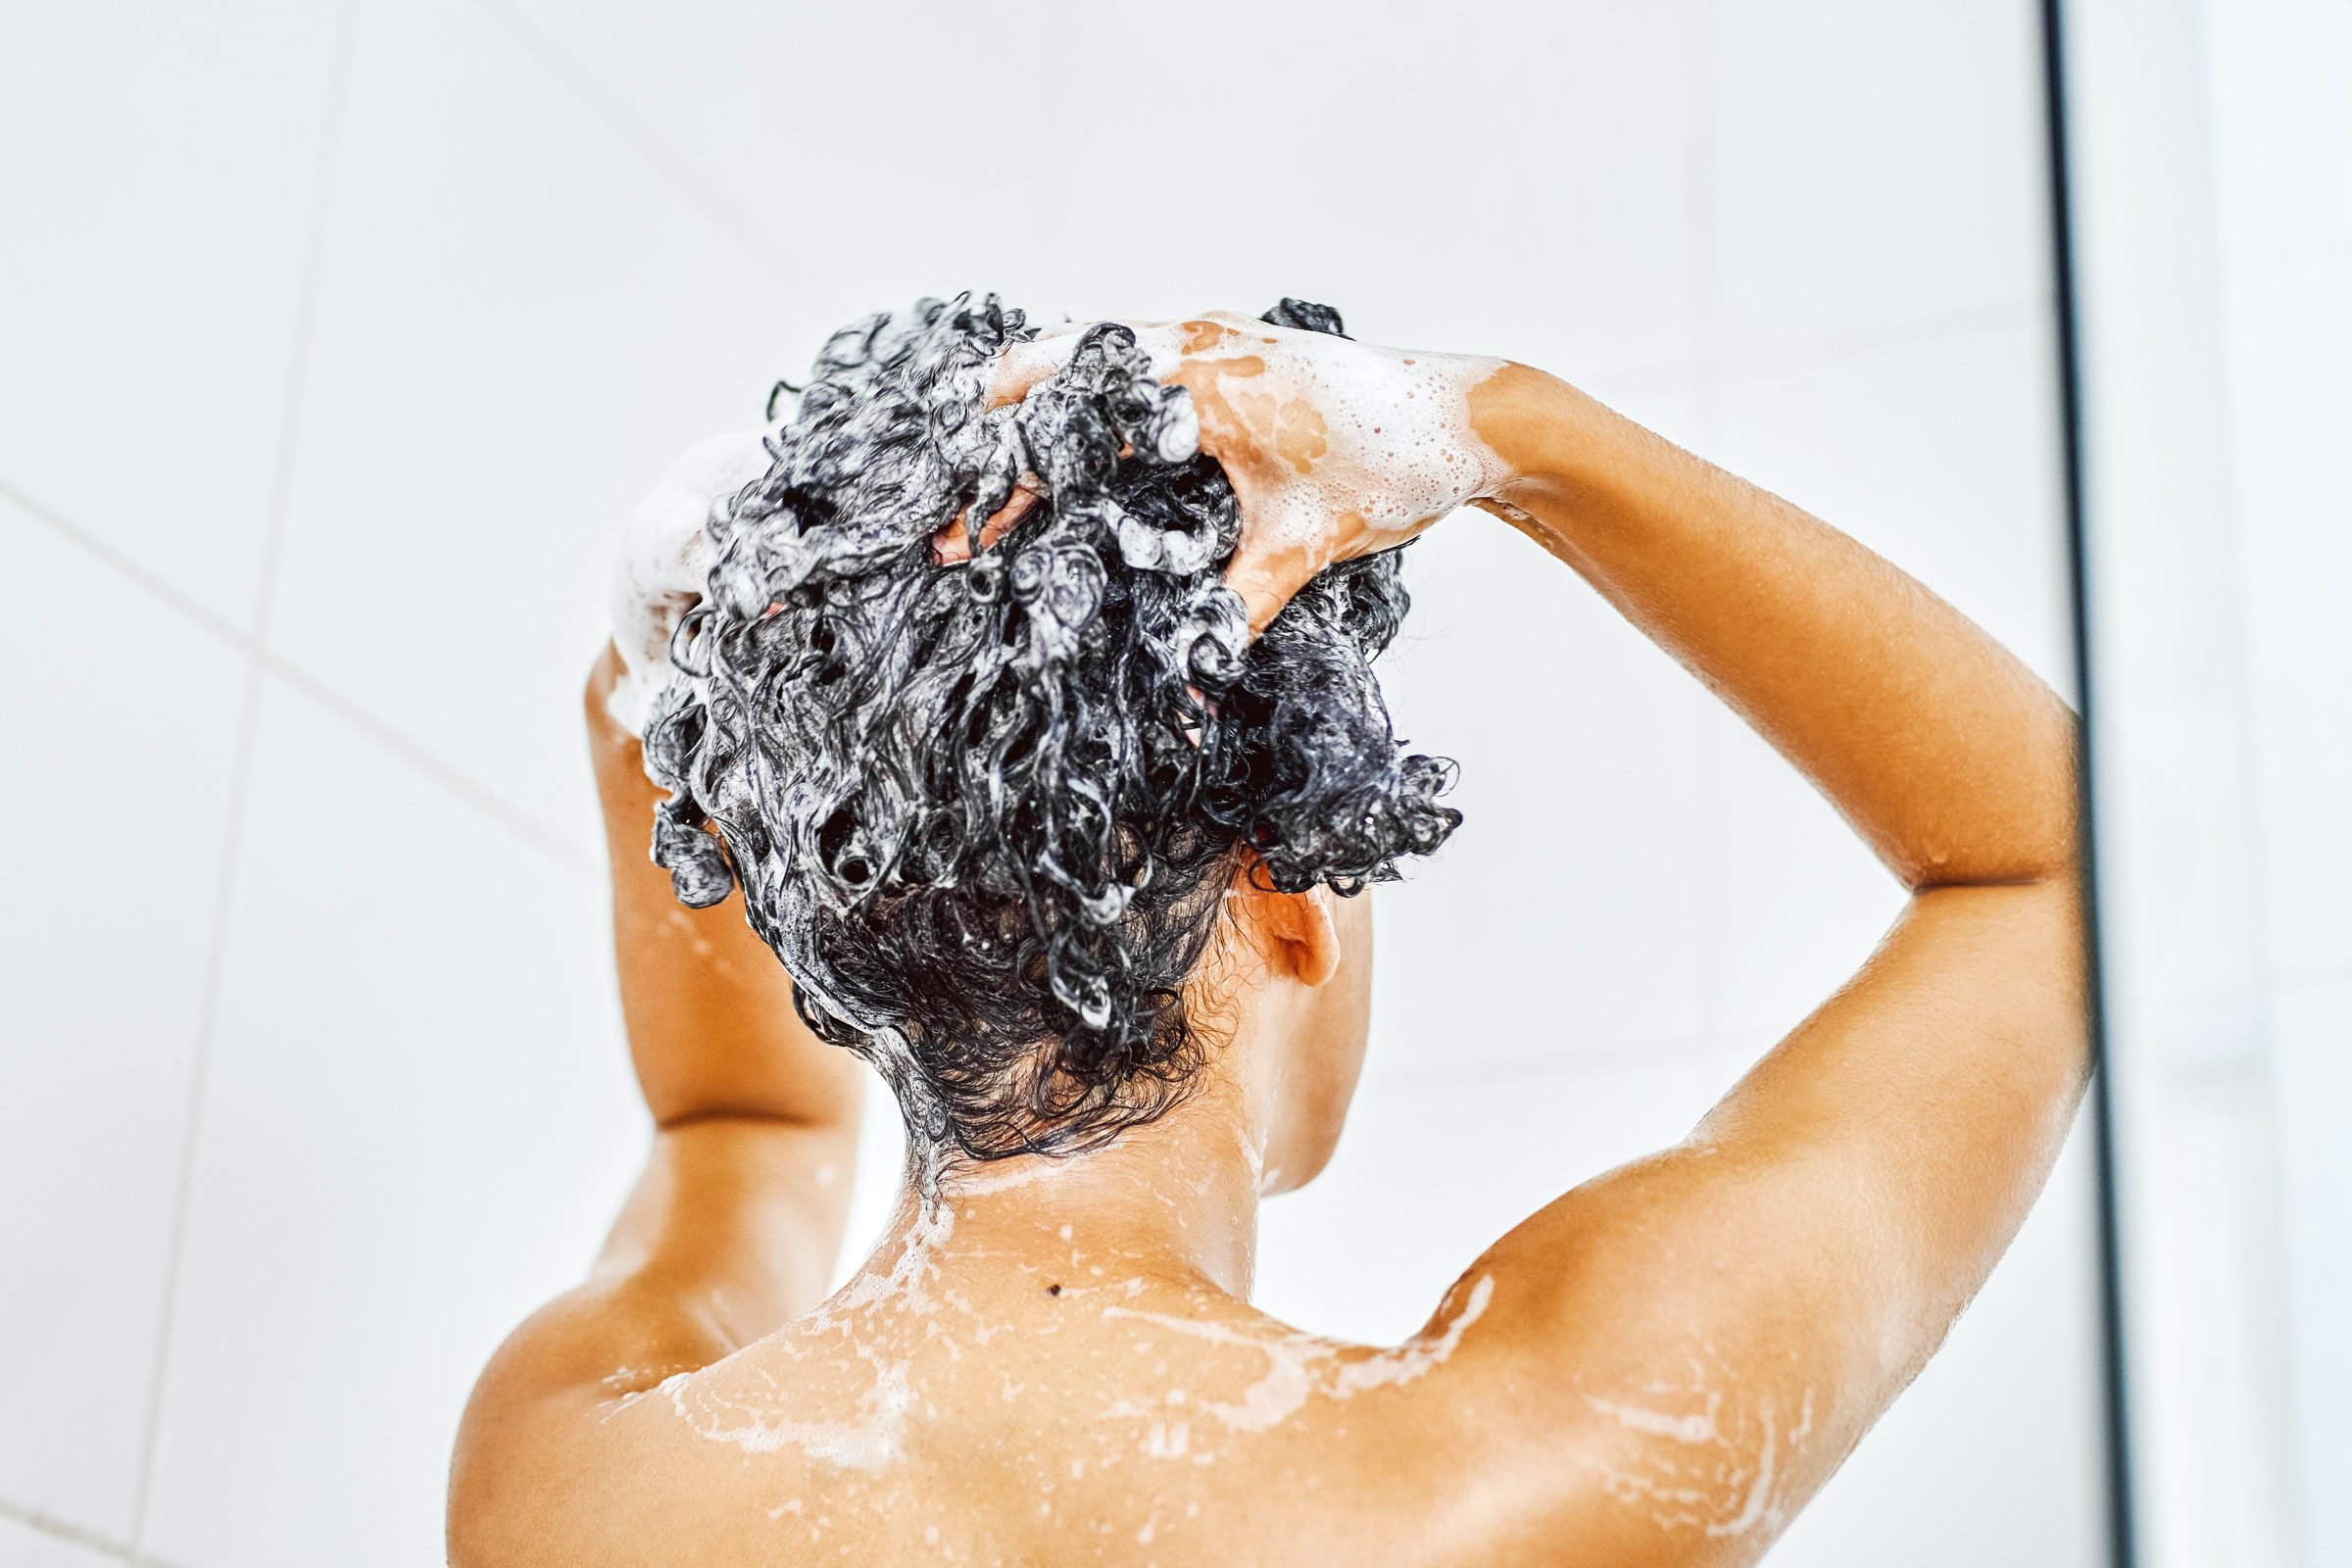 3 Ingredients that Make Your Hair Stink